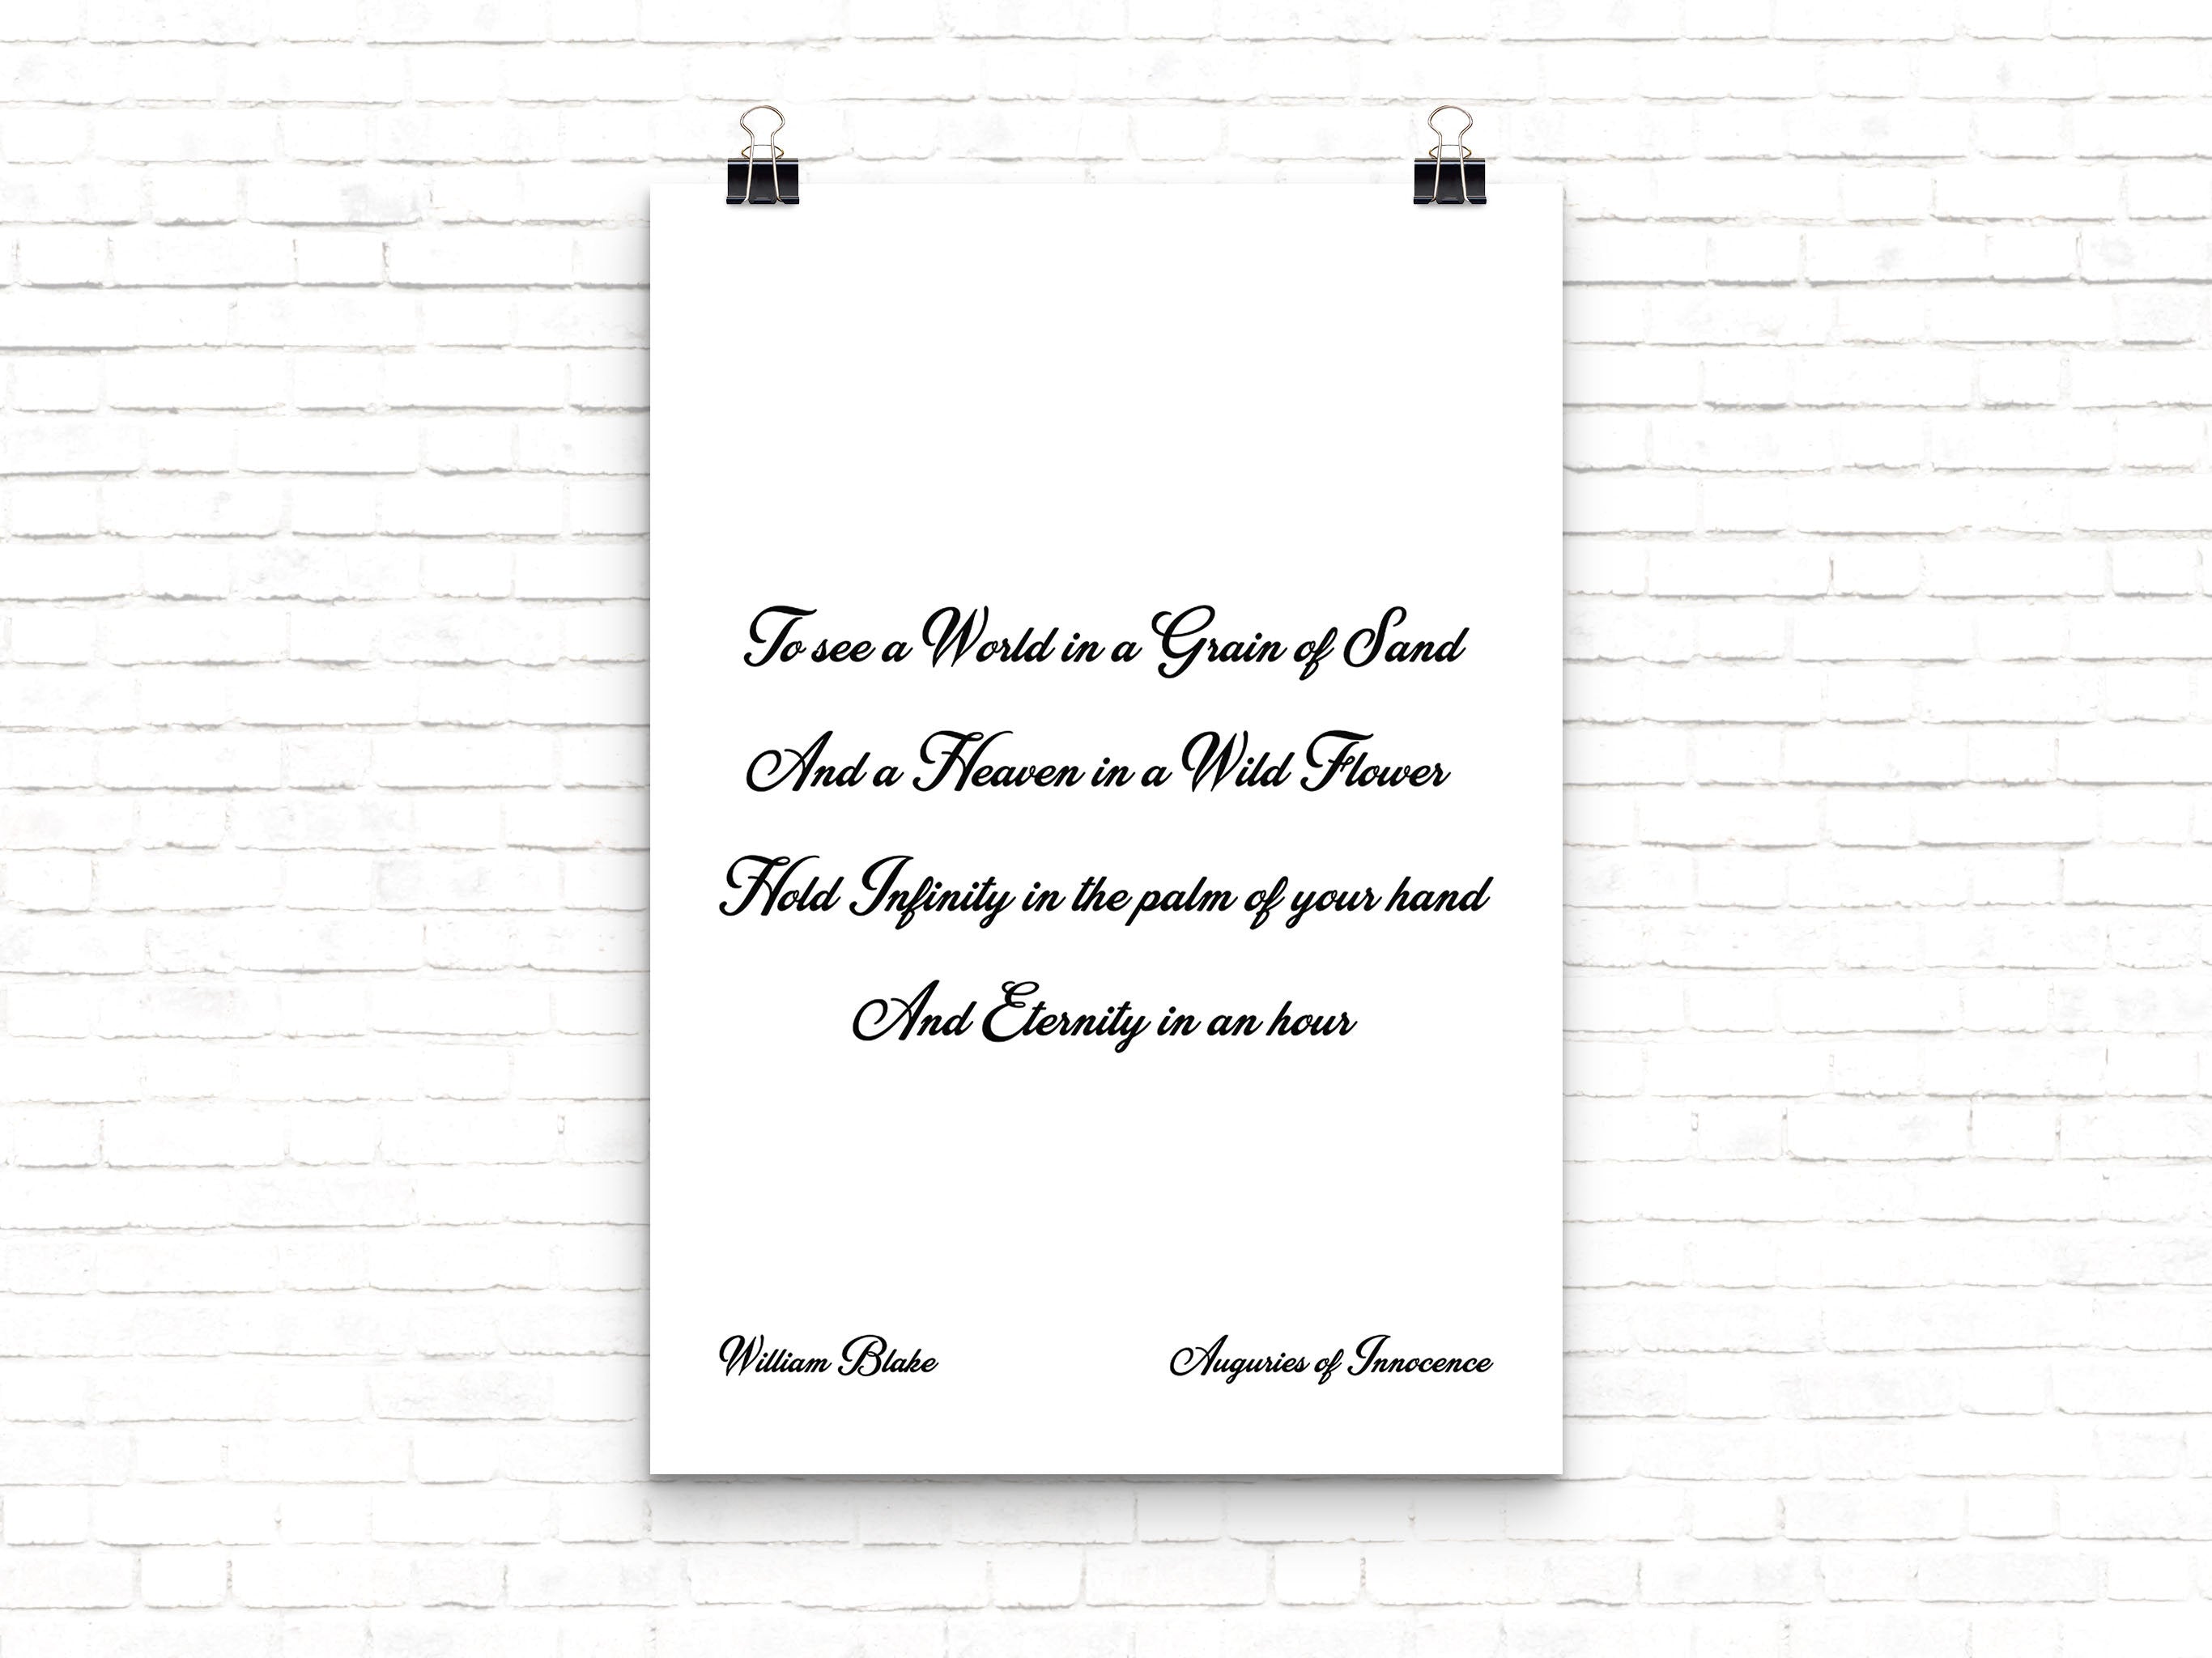 William Blake See The World in a Grain of Sand Poem Print, Inspirational Quote in Black & White for Home Wall Decor, Unframed - BookQuoteDecor